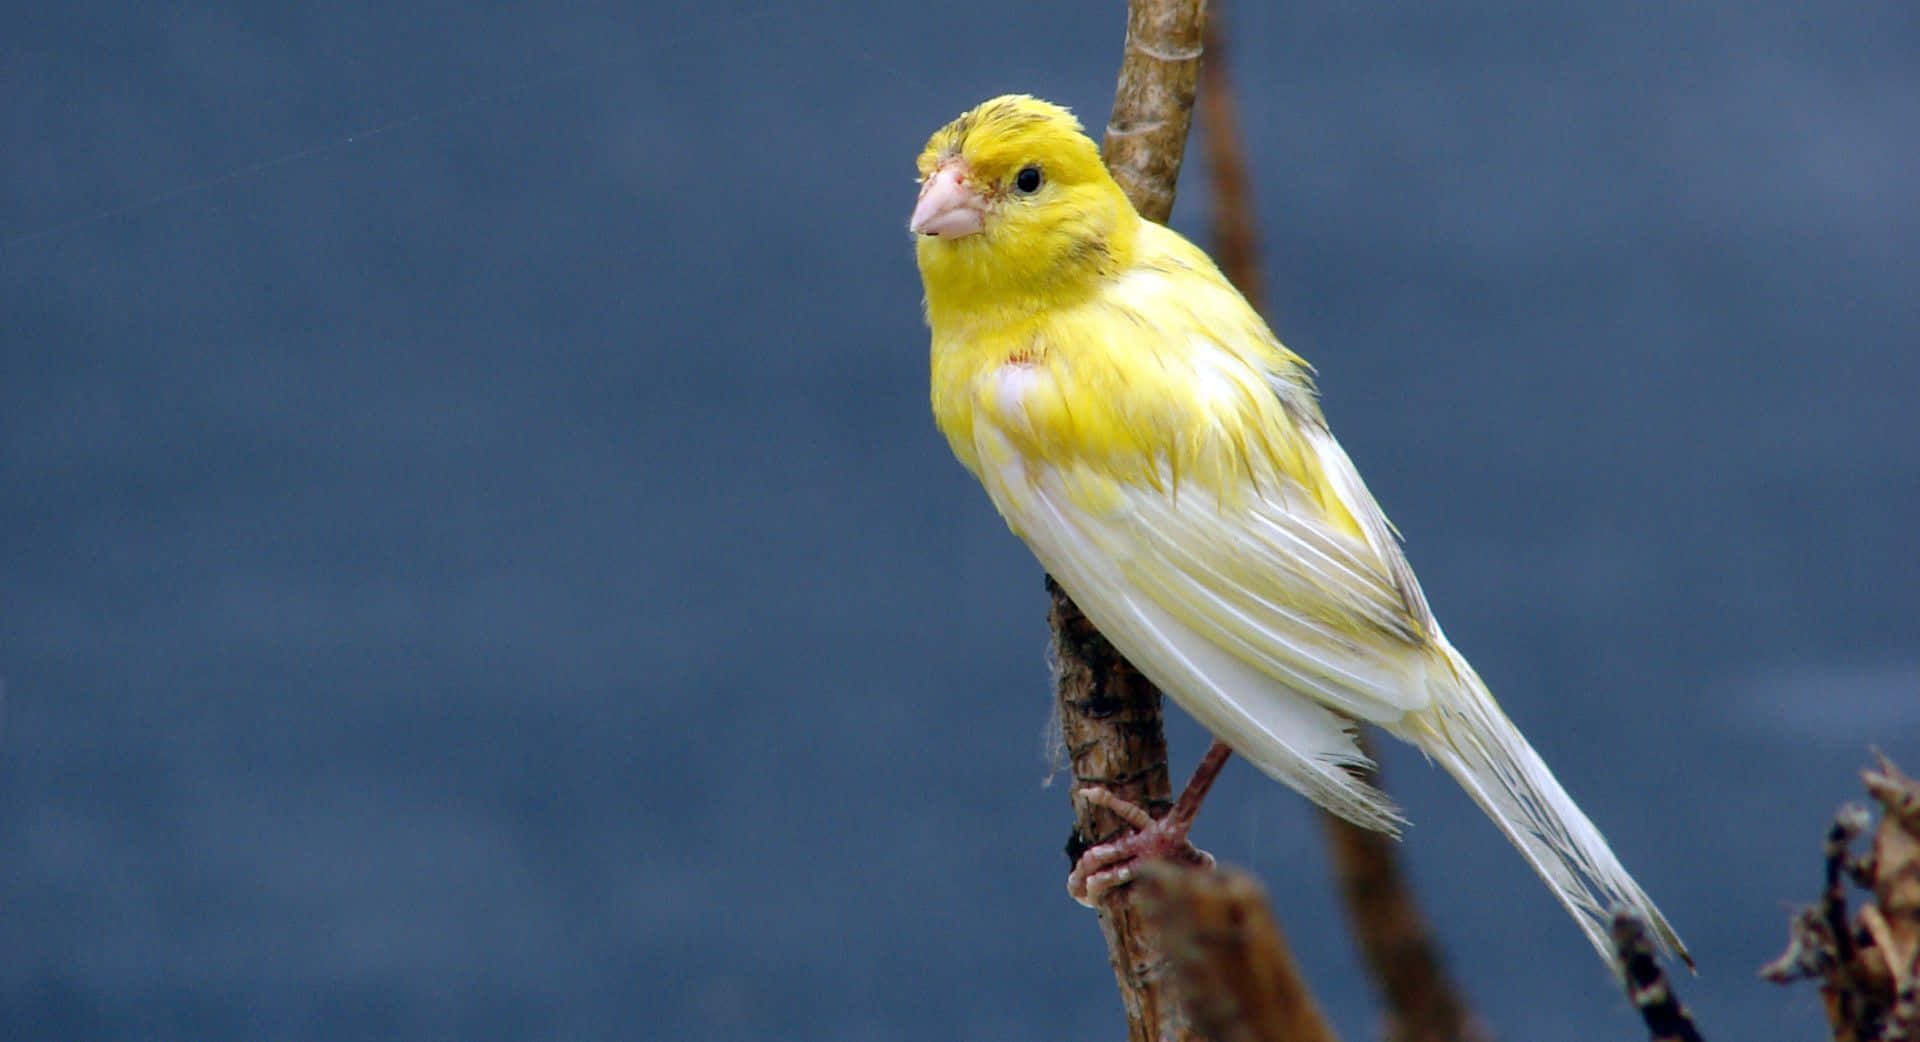 Yellow Canary perched on a branch Wallpaper